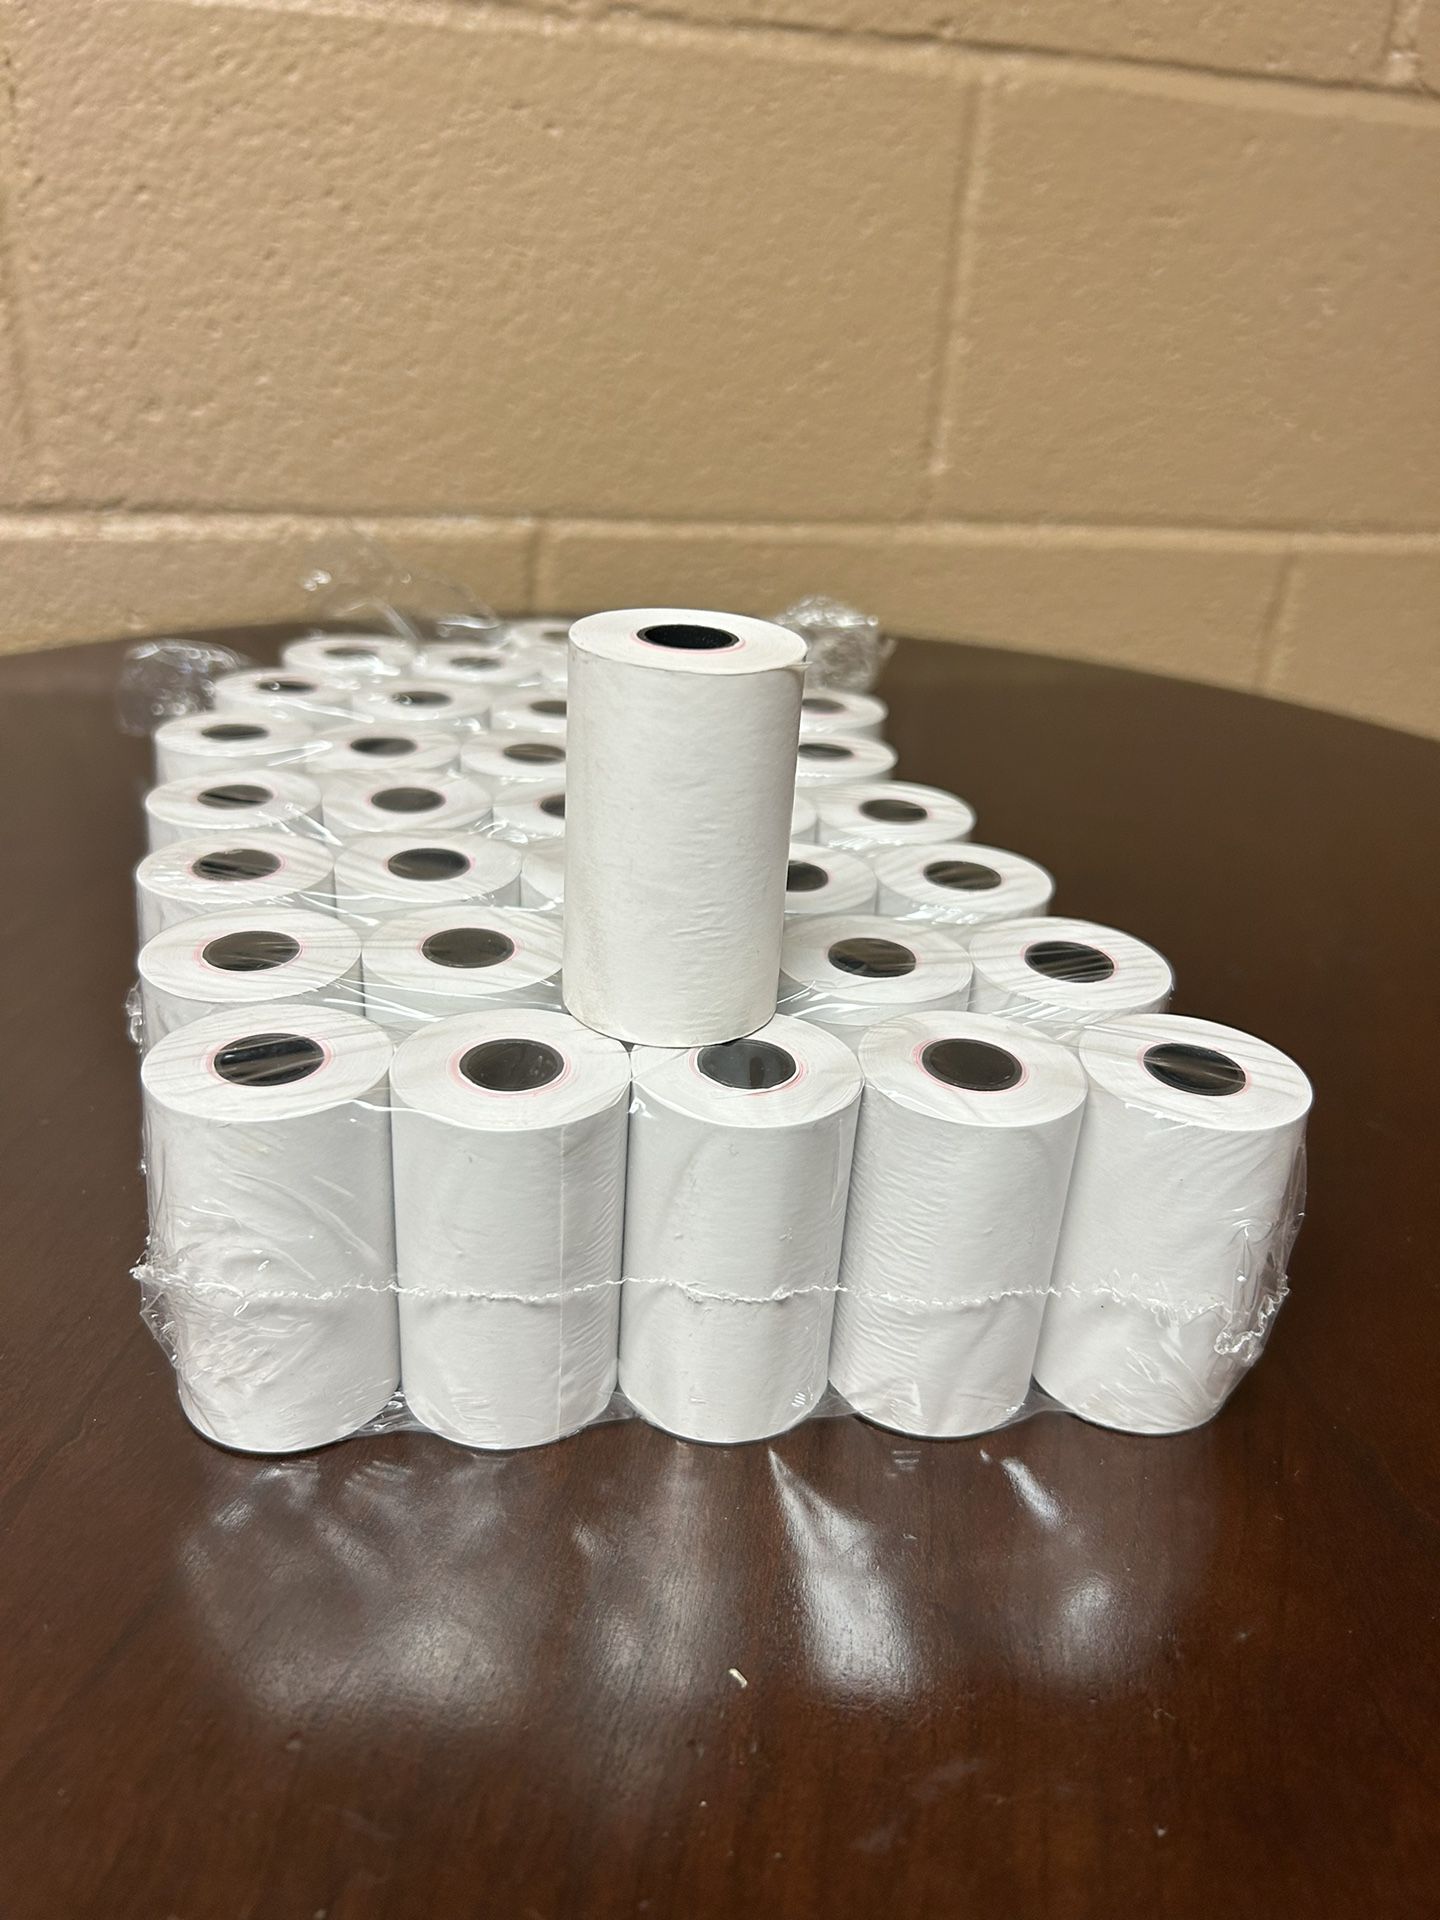 Thermal Paper 7 Rolls Unopened 